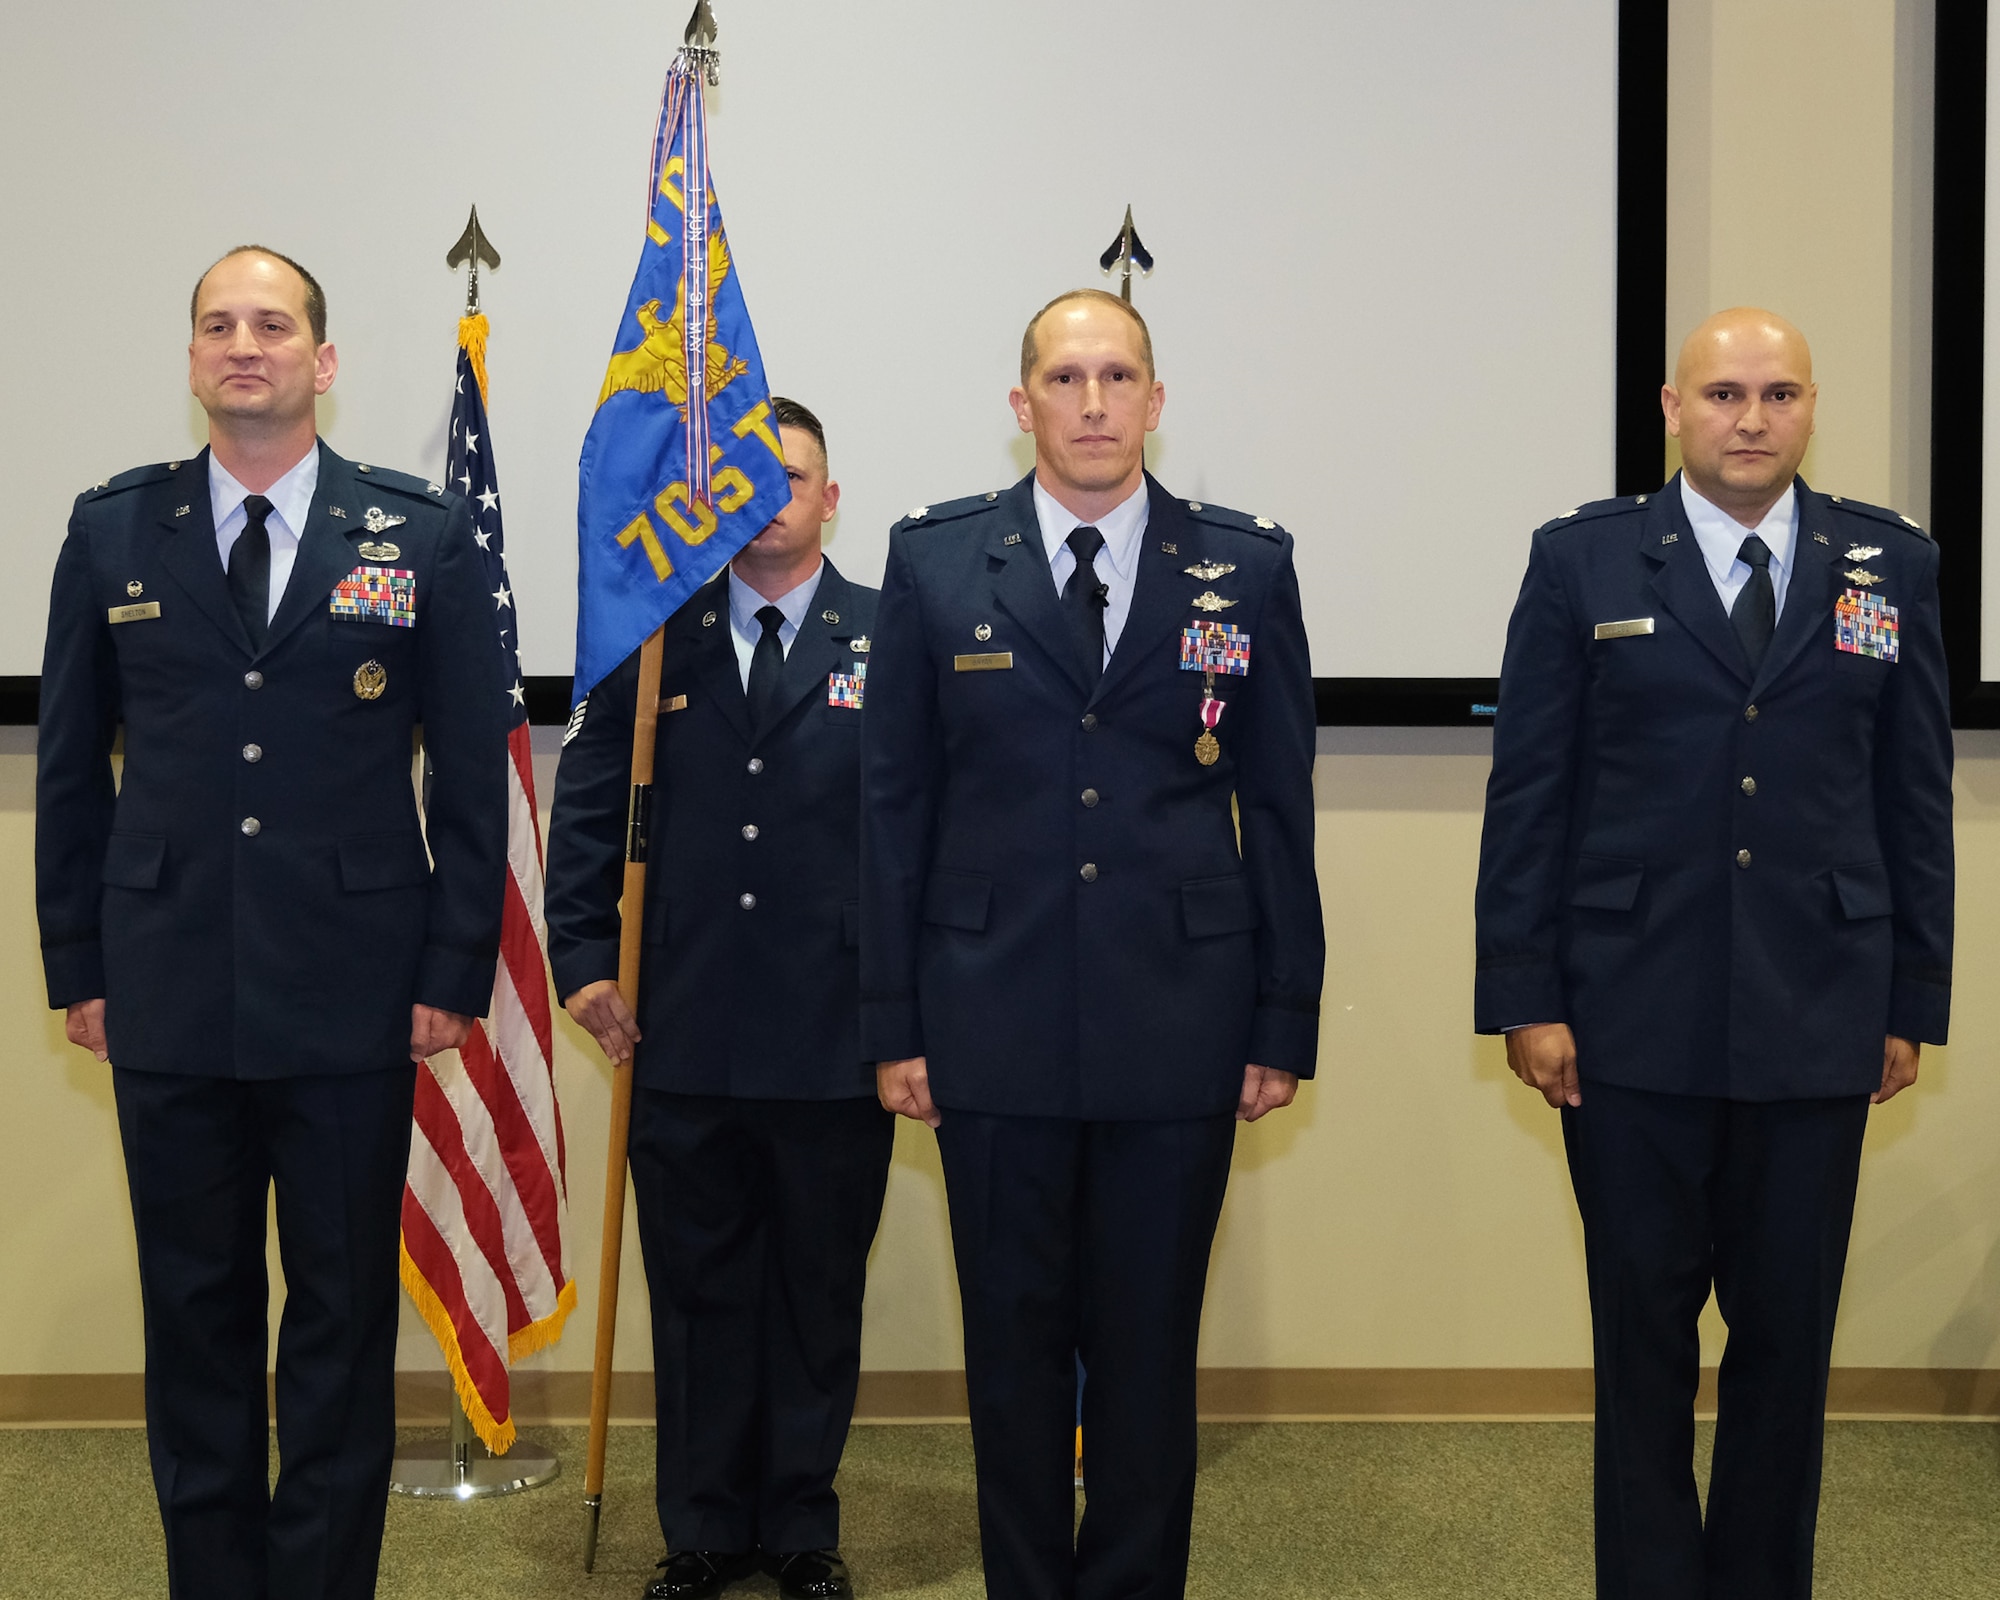 photo of four uniformed, US military members standing at attention on a stage